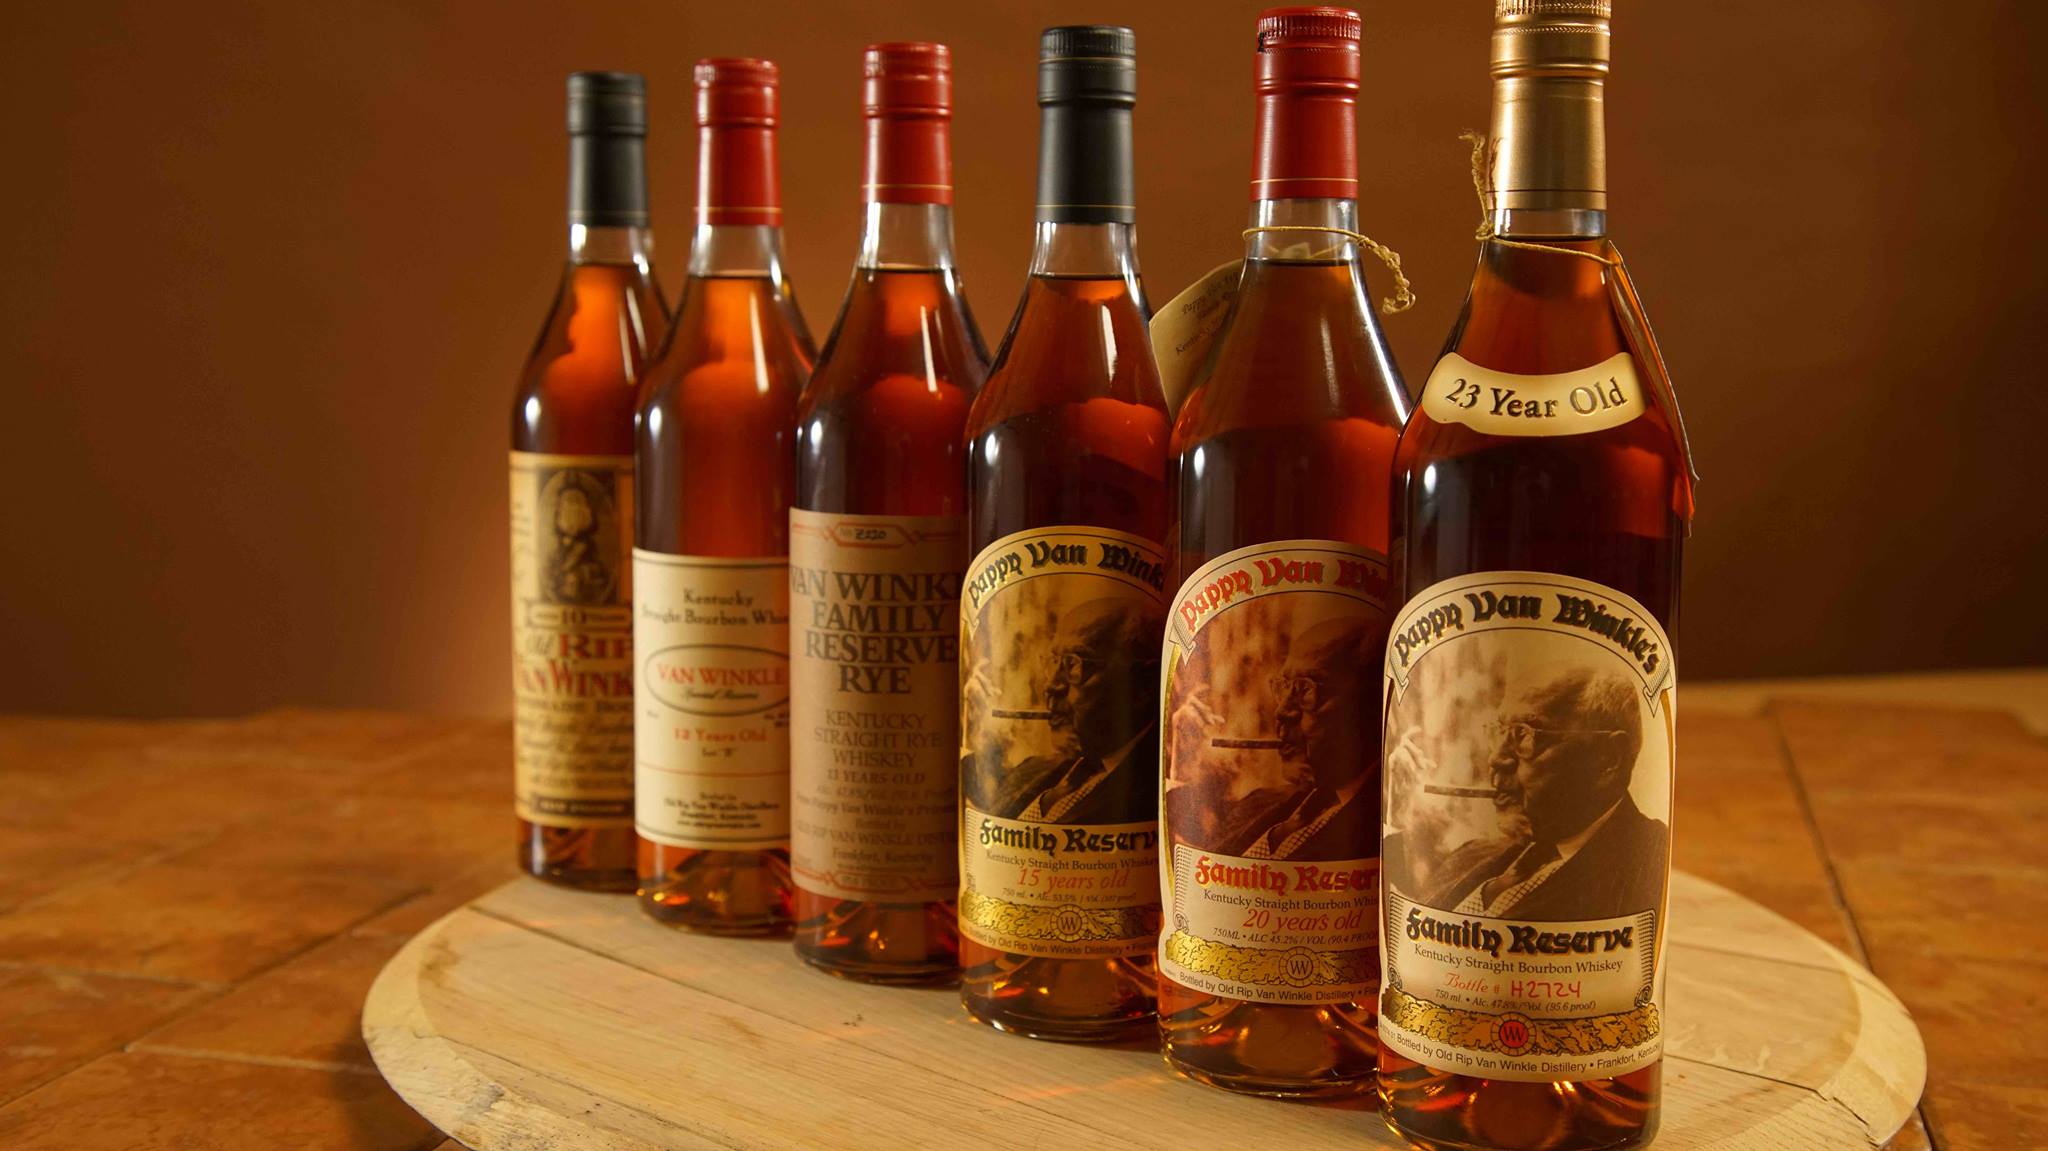 Why Pappy Van Winkle Bourbon is so Expensive?